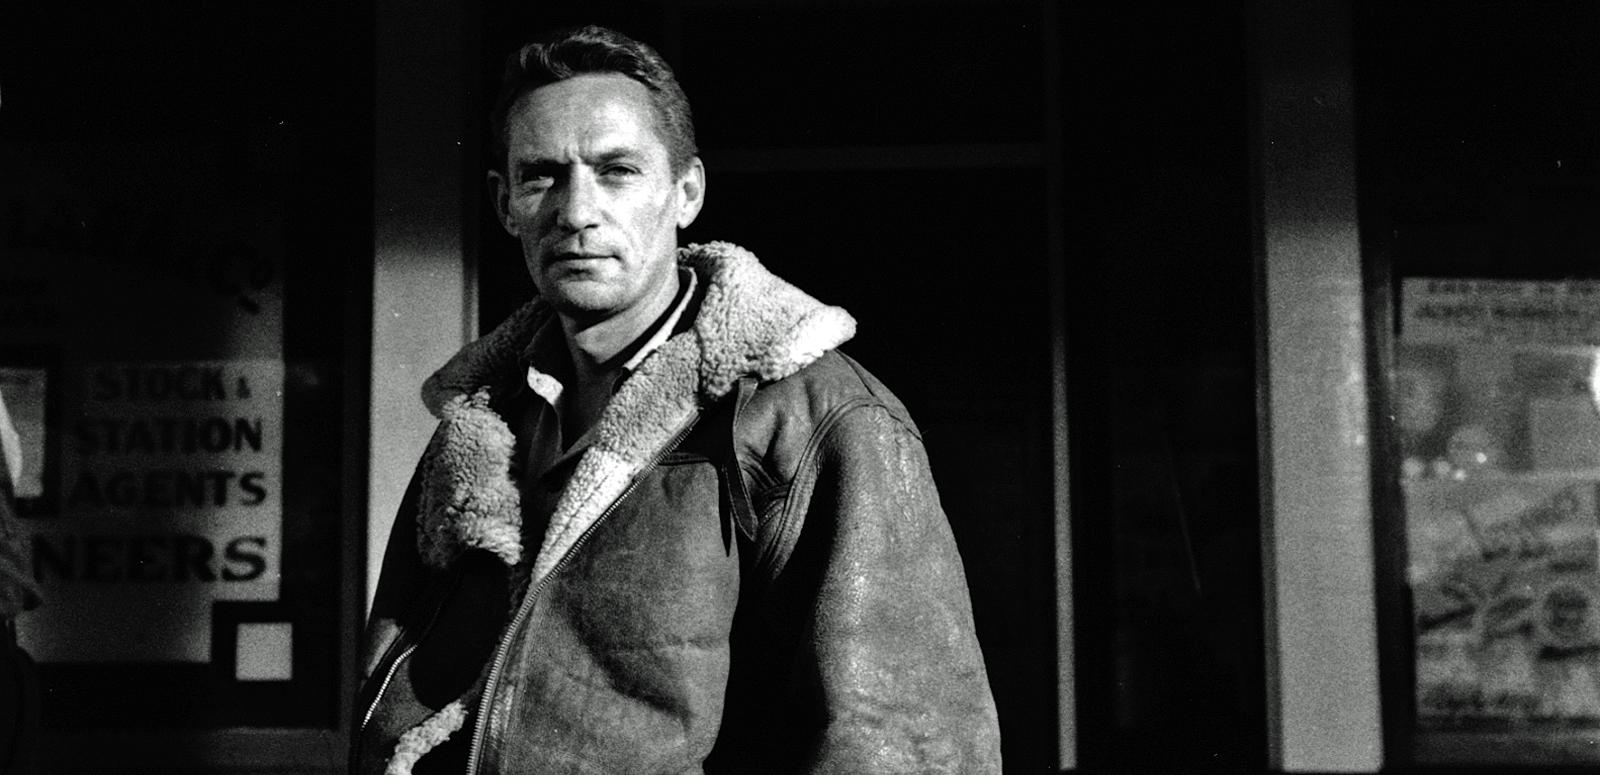 Film still from The Shiralee featuring Peter Finch.